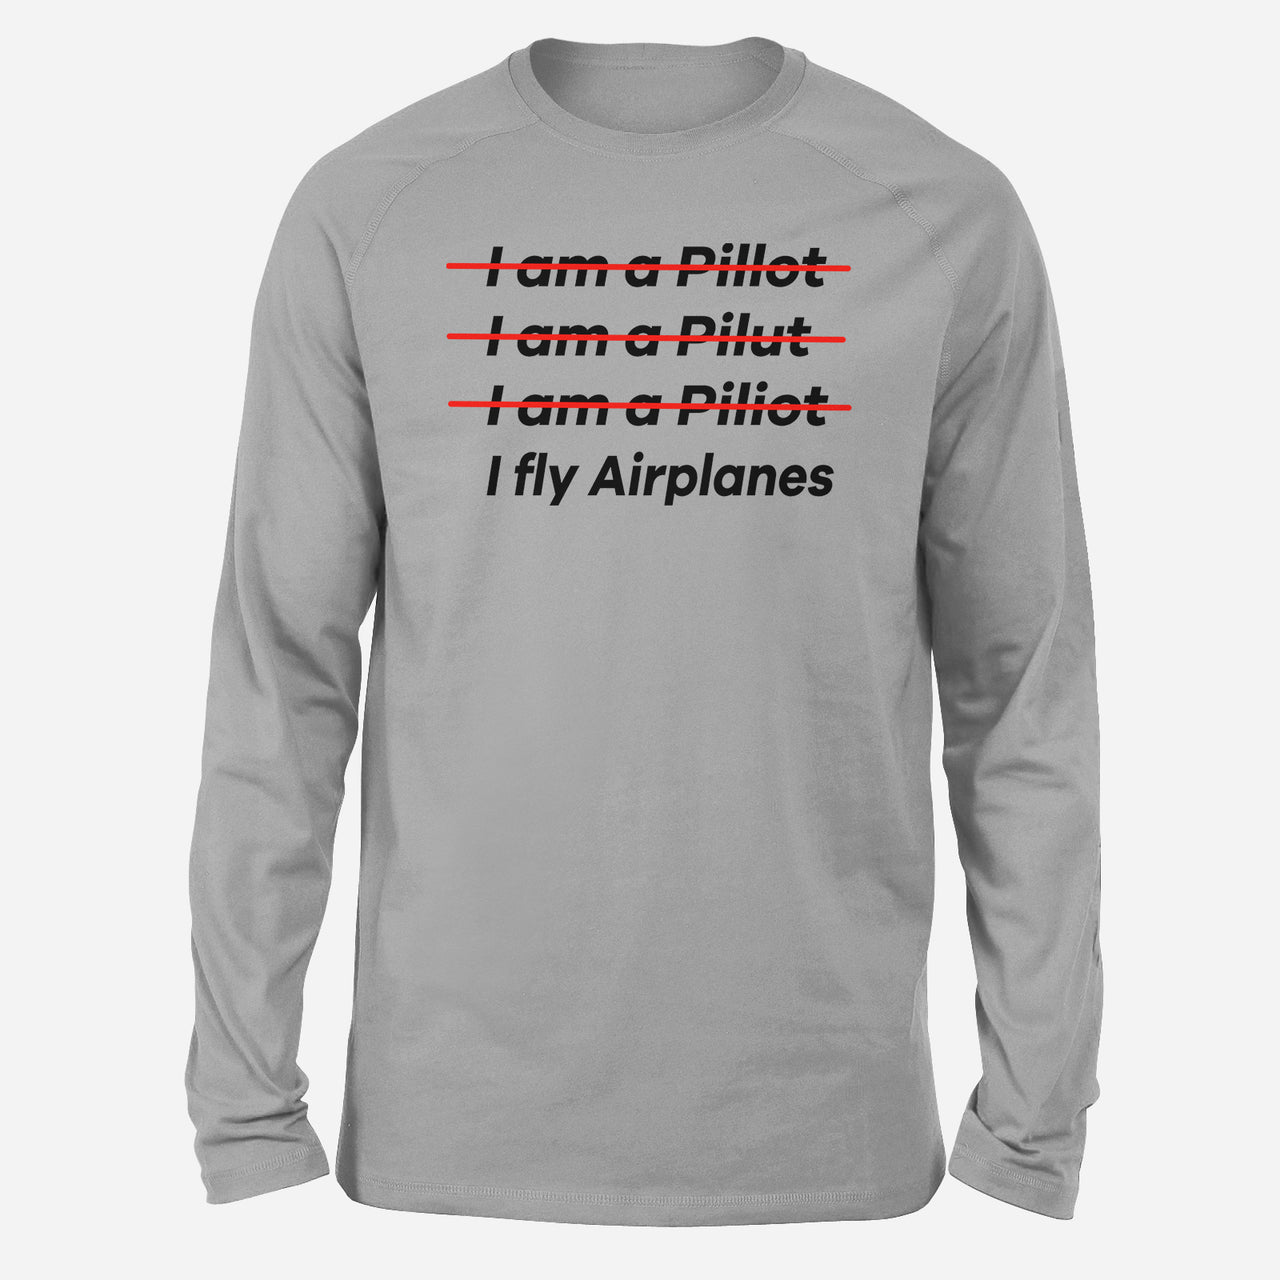 I Fly Airplanes Designed Long-Sleeve T-Shirts